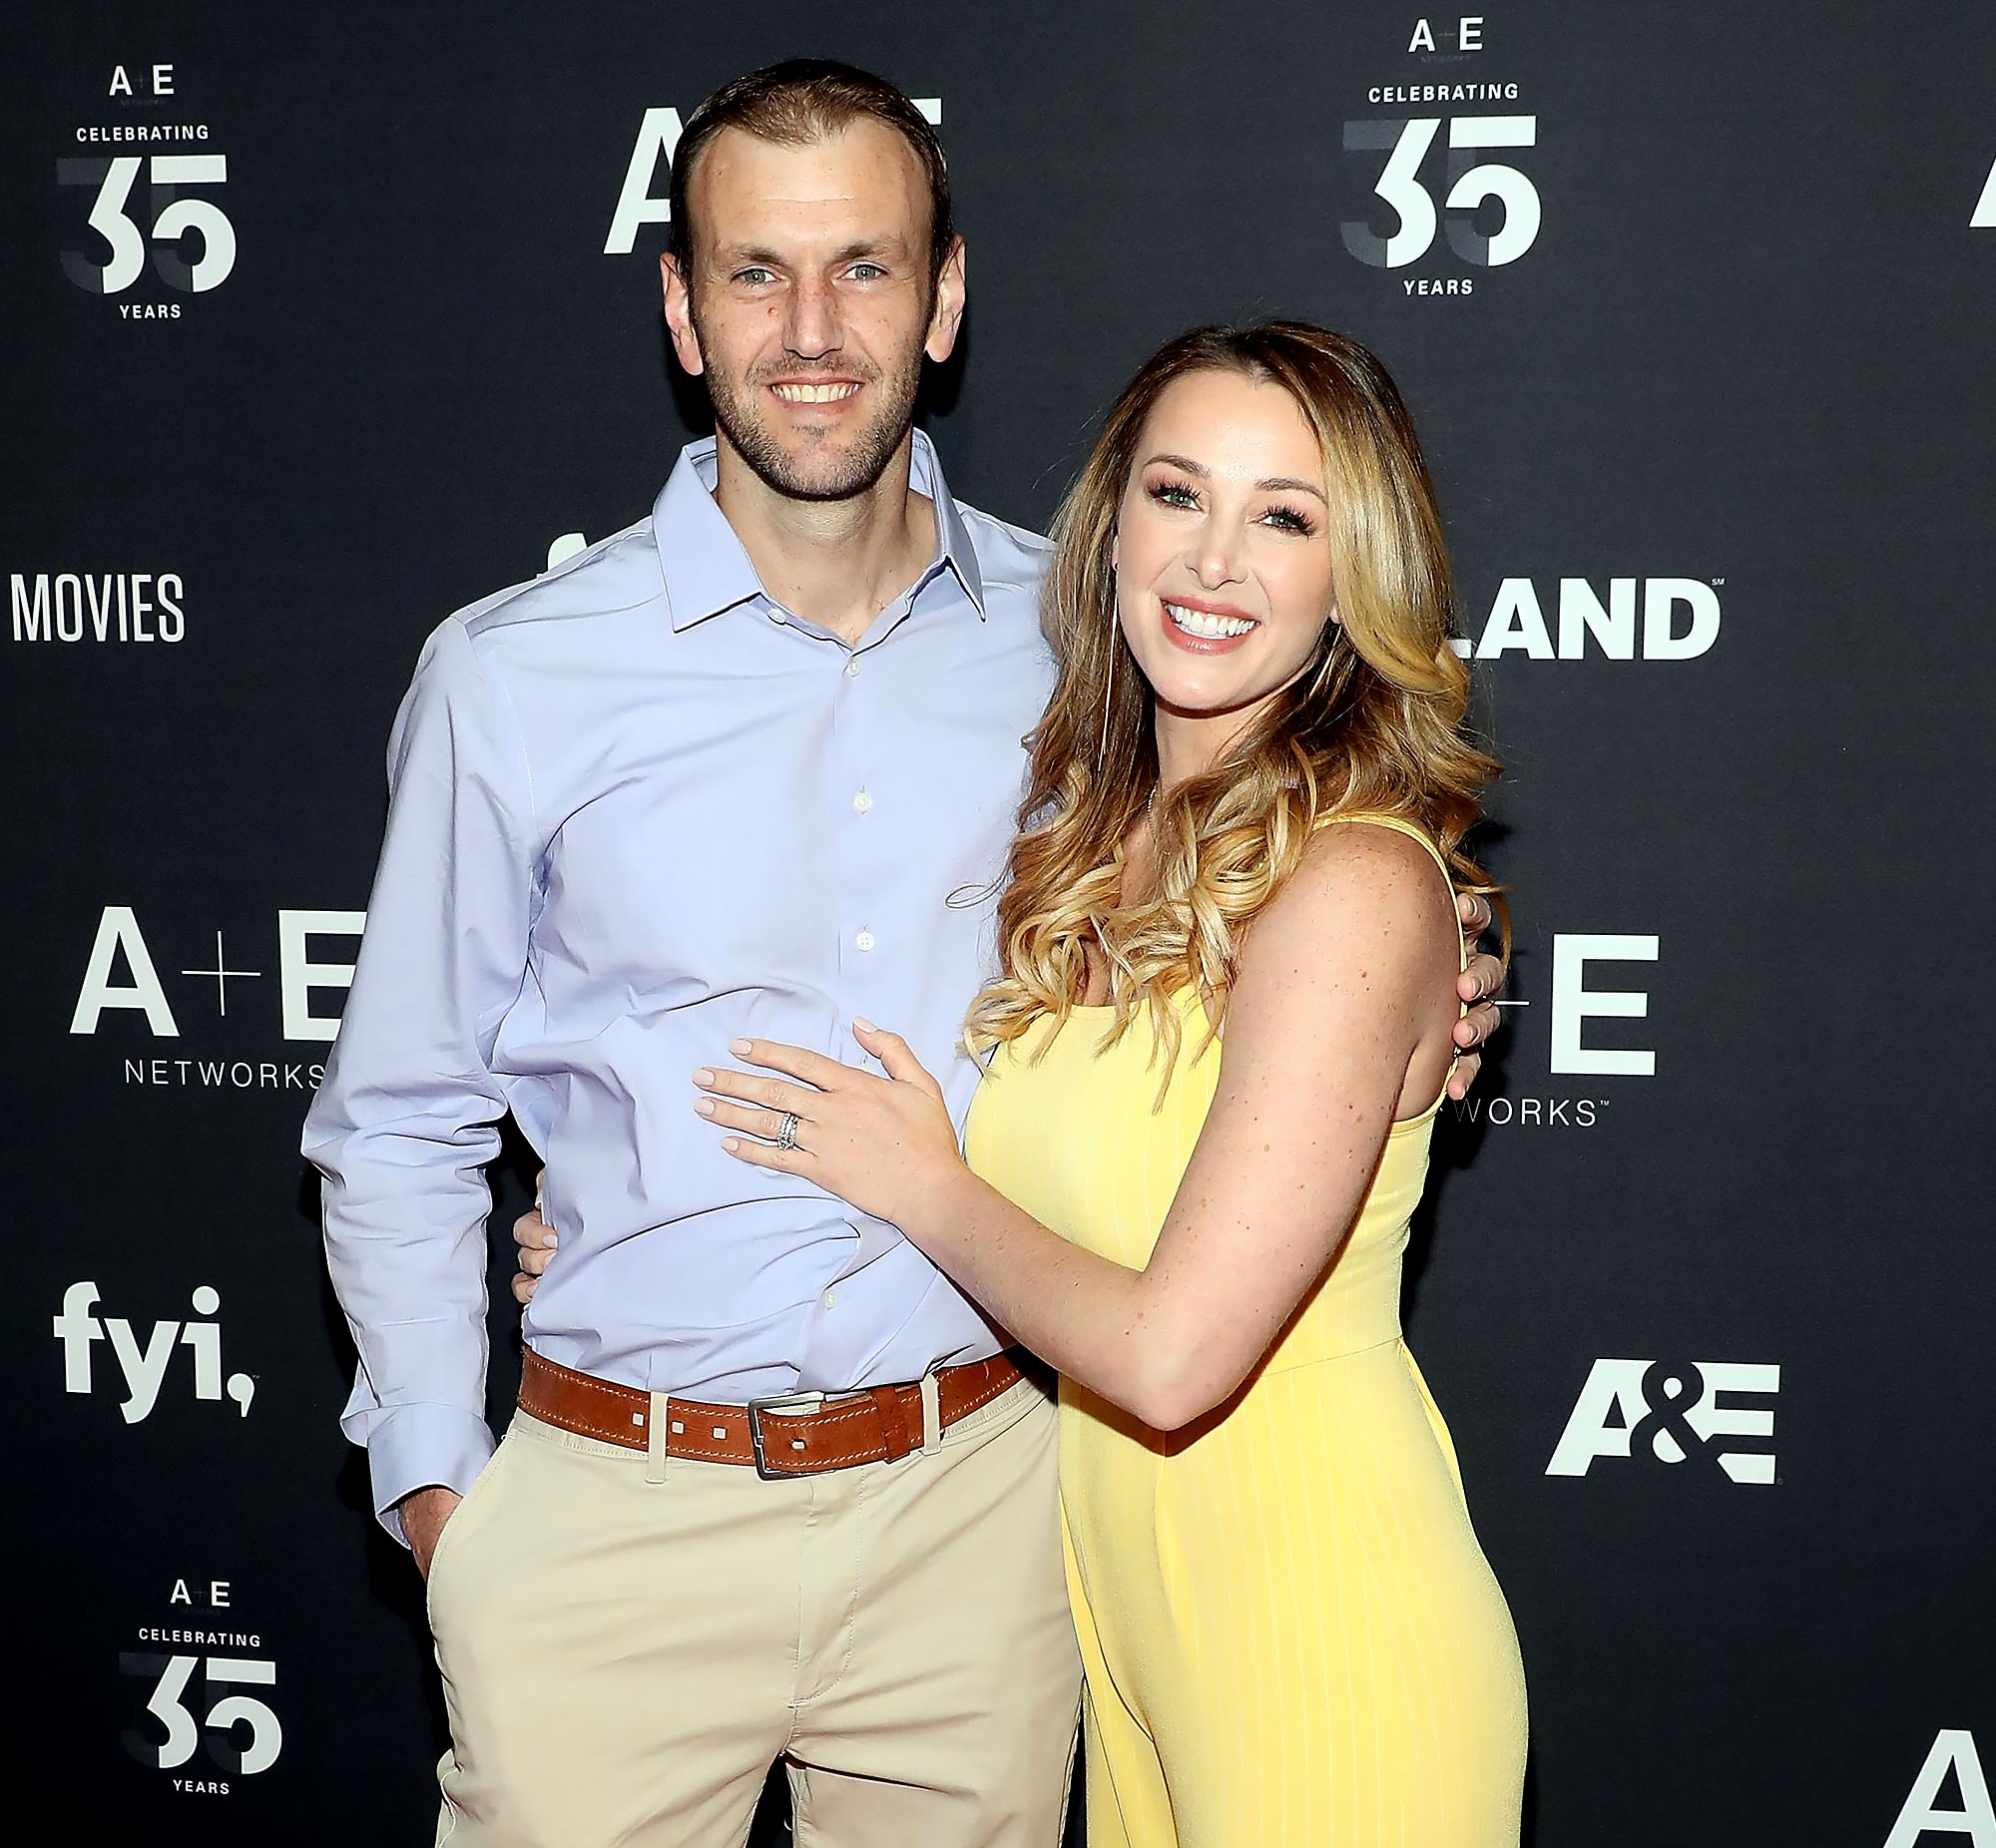 Married at First Sight's Jamie Otis Is Actually Pregnant With Twins: 'Over the Moon Excited'